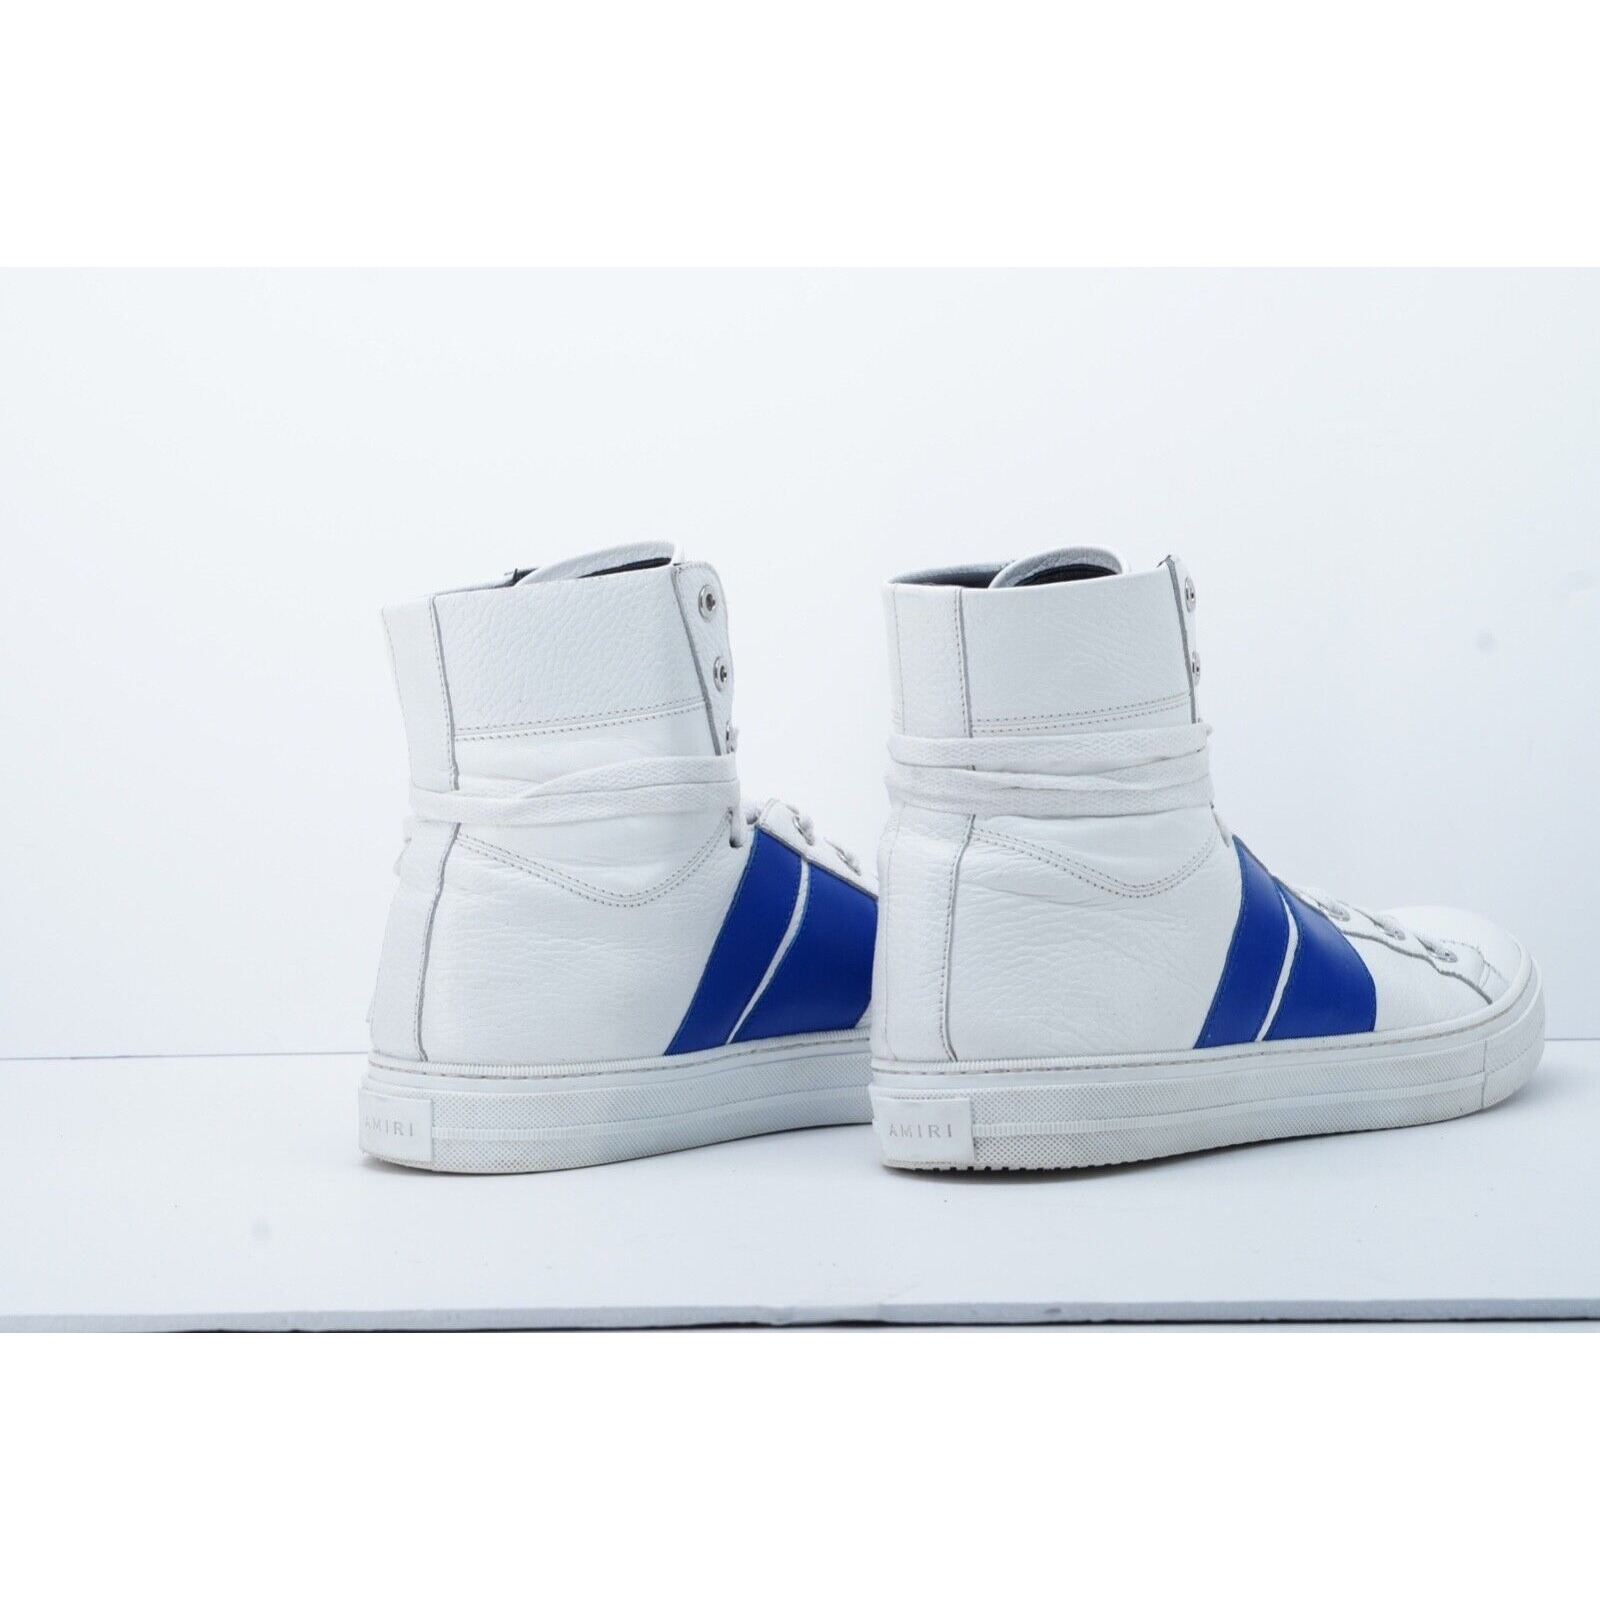 Amiri Sunset Sneakers White Blue High Top Lace Up $595 - Siz - 6